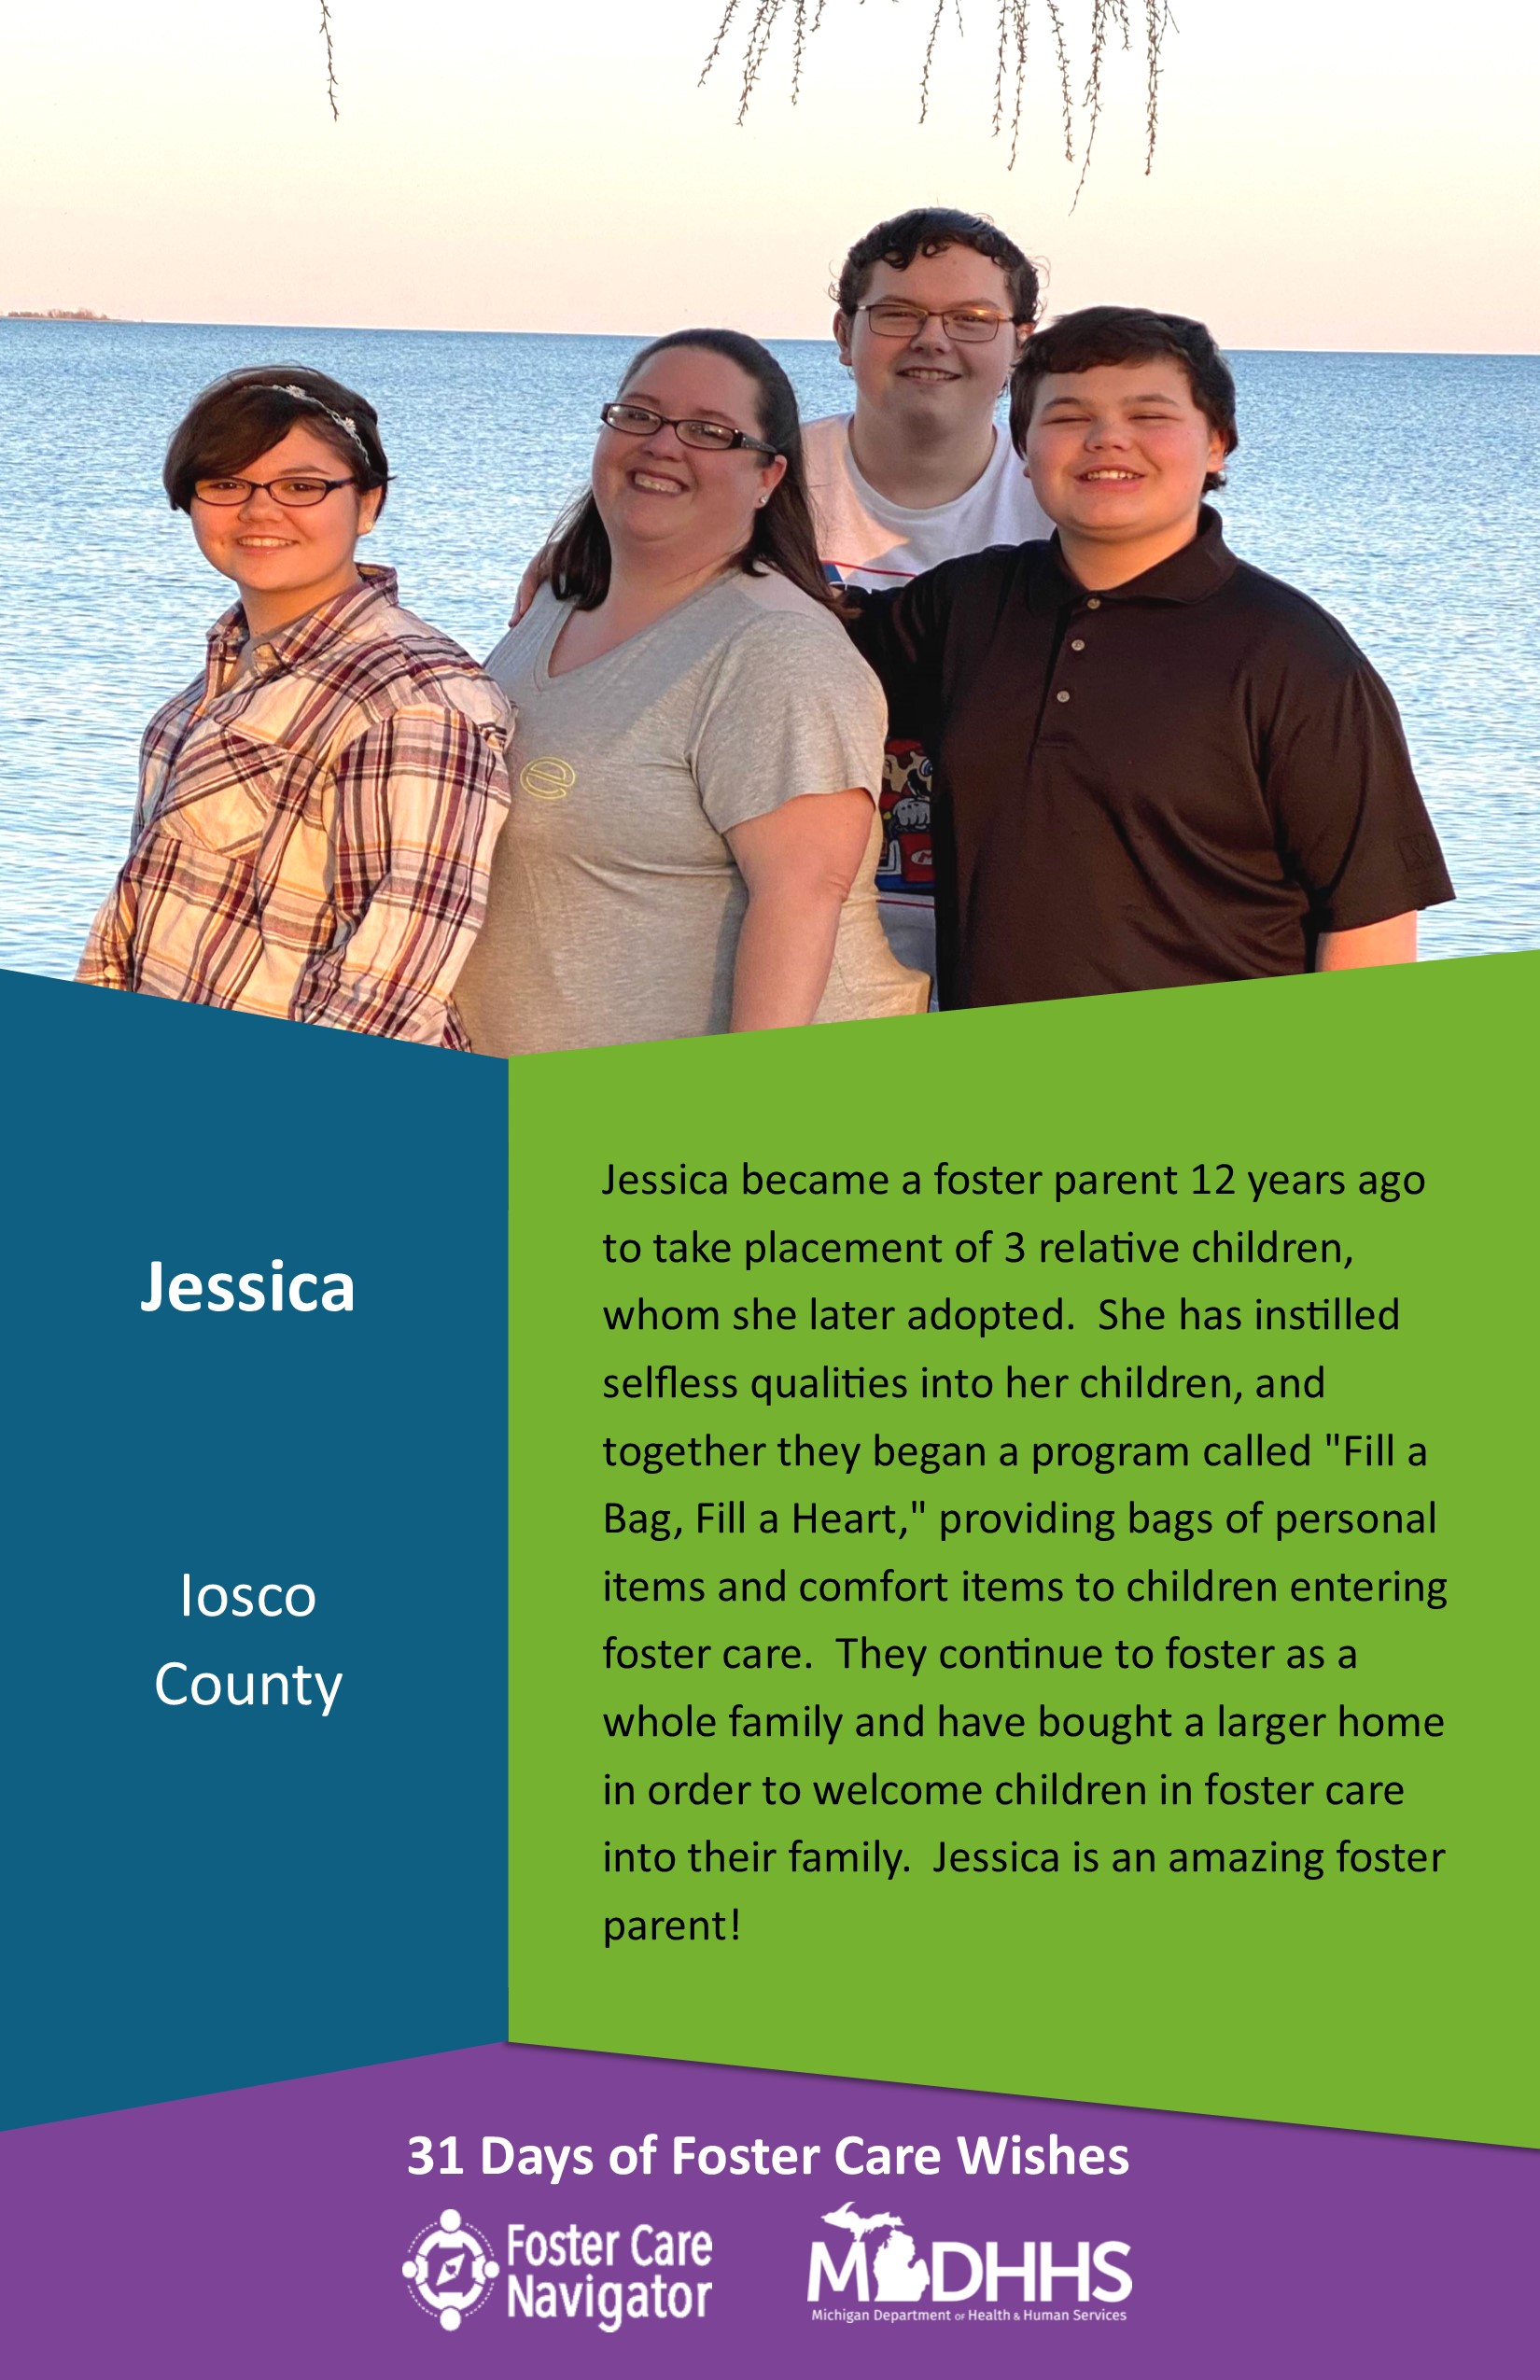 This full page feature includes all of the text listed in the body of this blog post as well as a photo of Jessica. The background is blue on the left, green on the right, and purple at the bottom of the page where the logos are located.